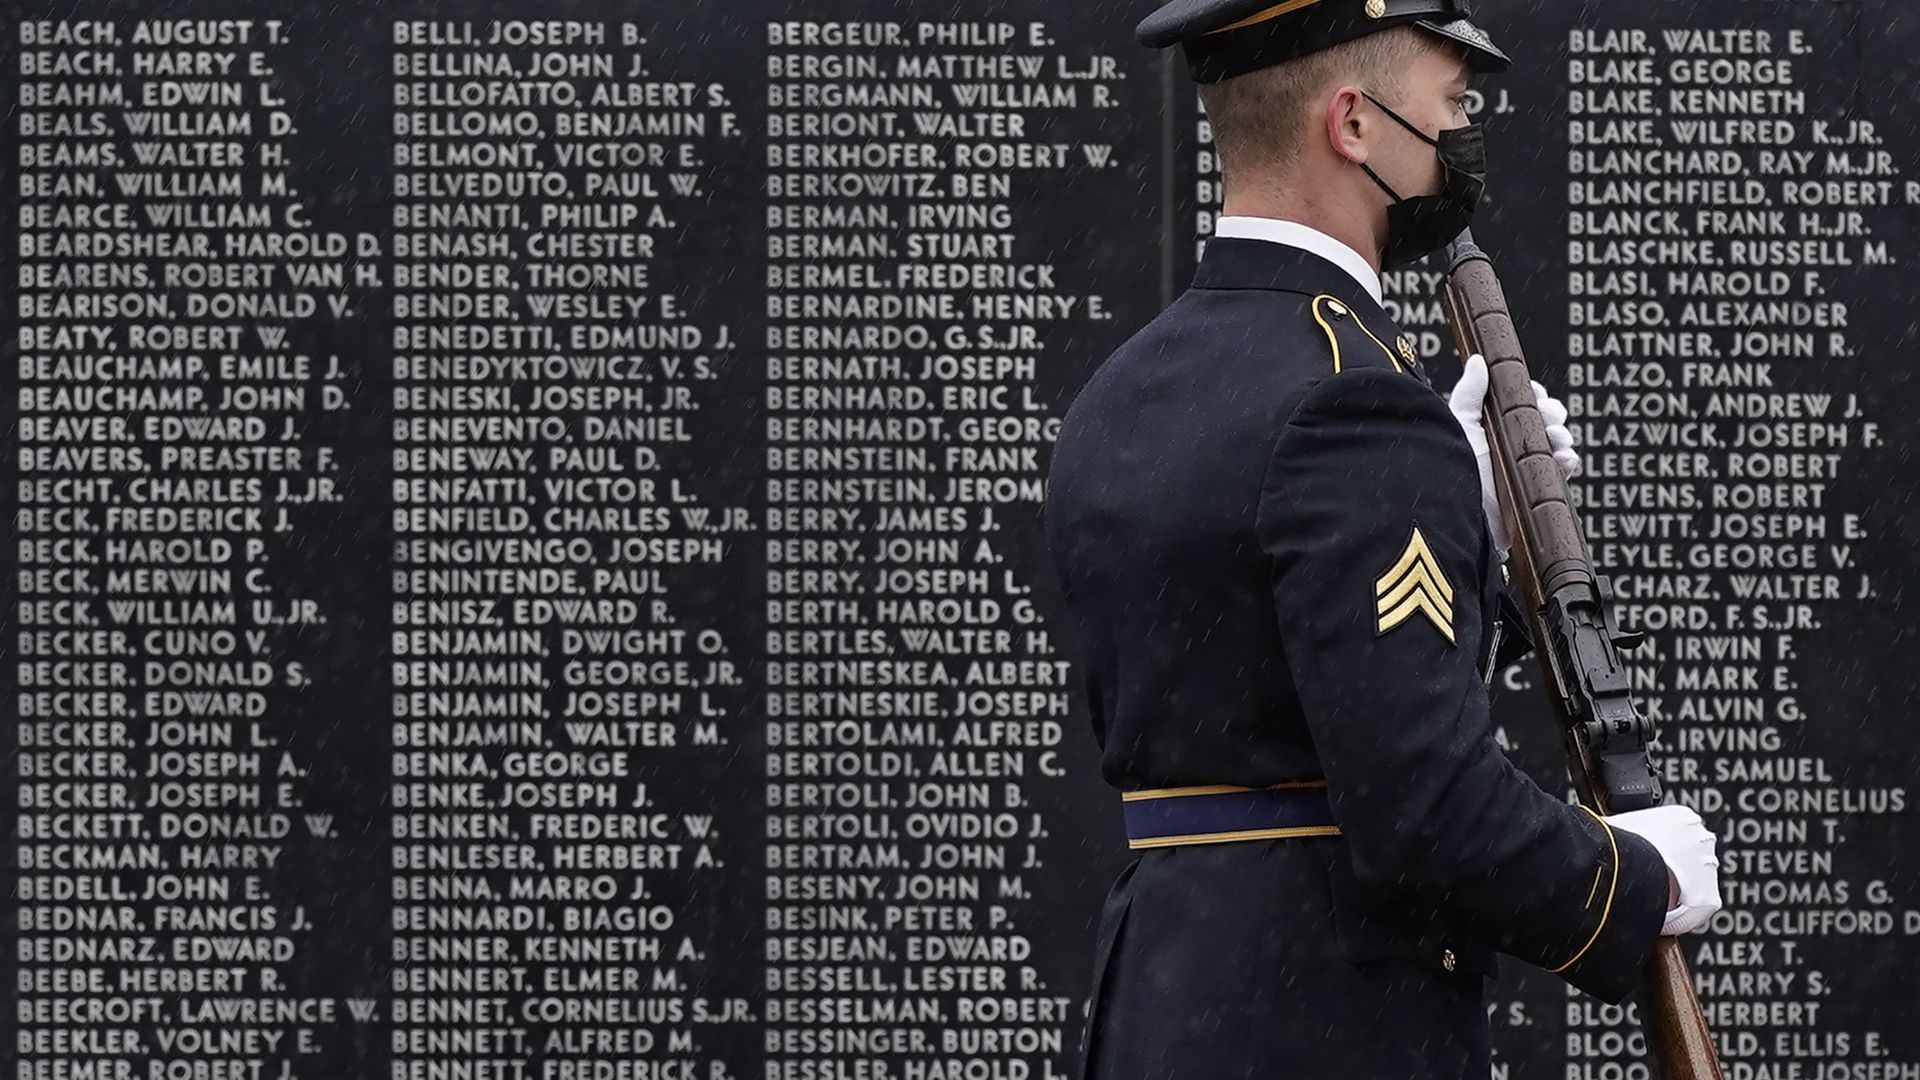 A soldier in uniform walks past long rows of names inscribed on marble